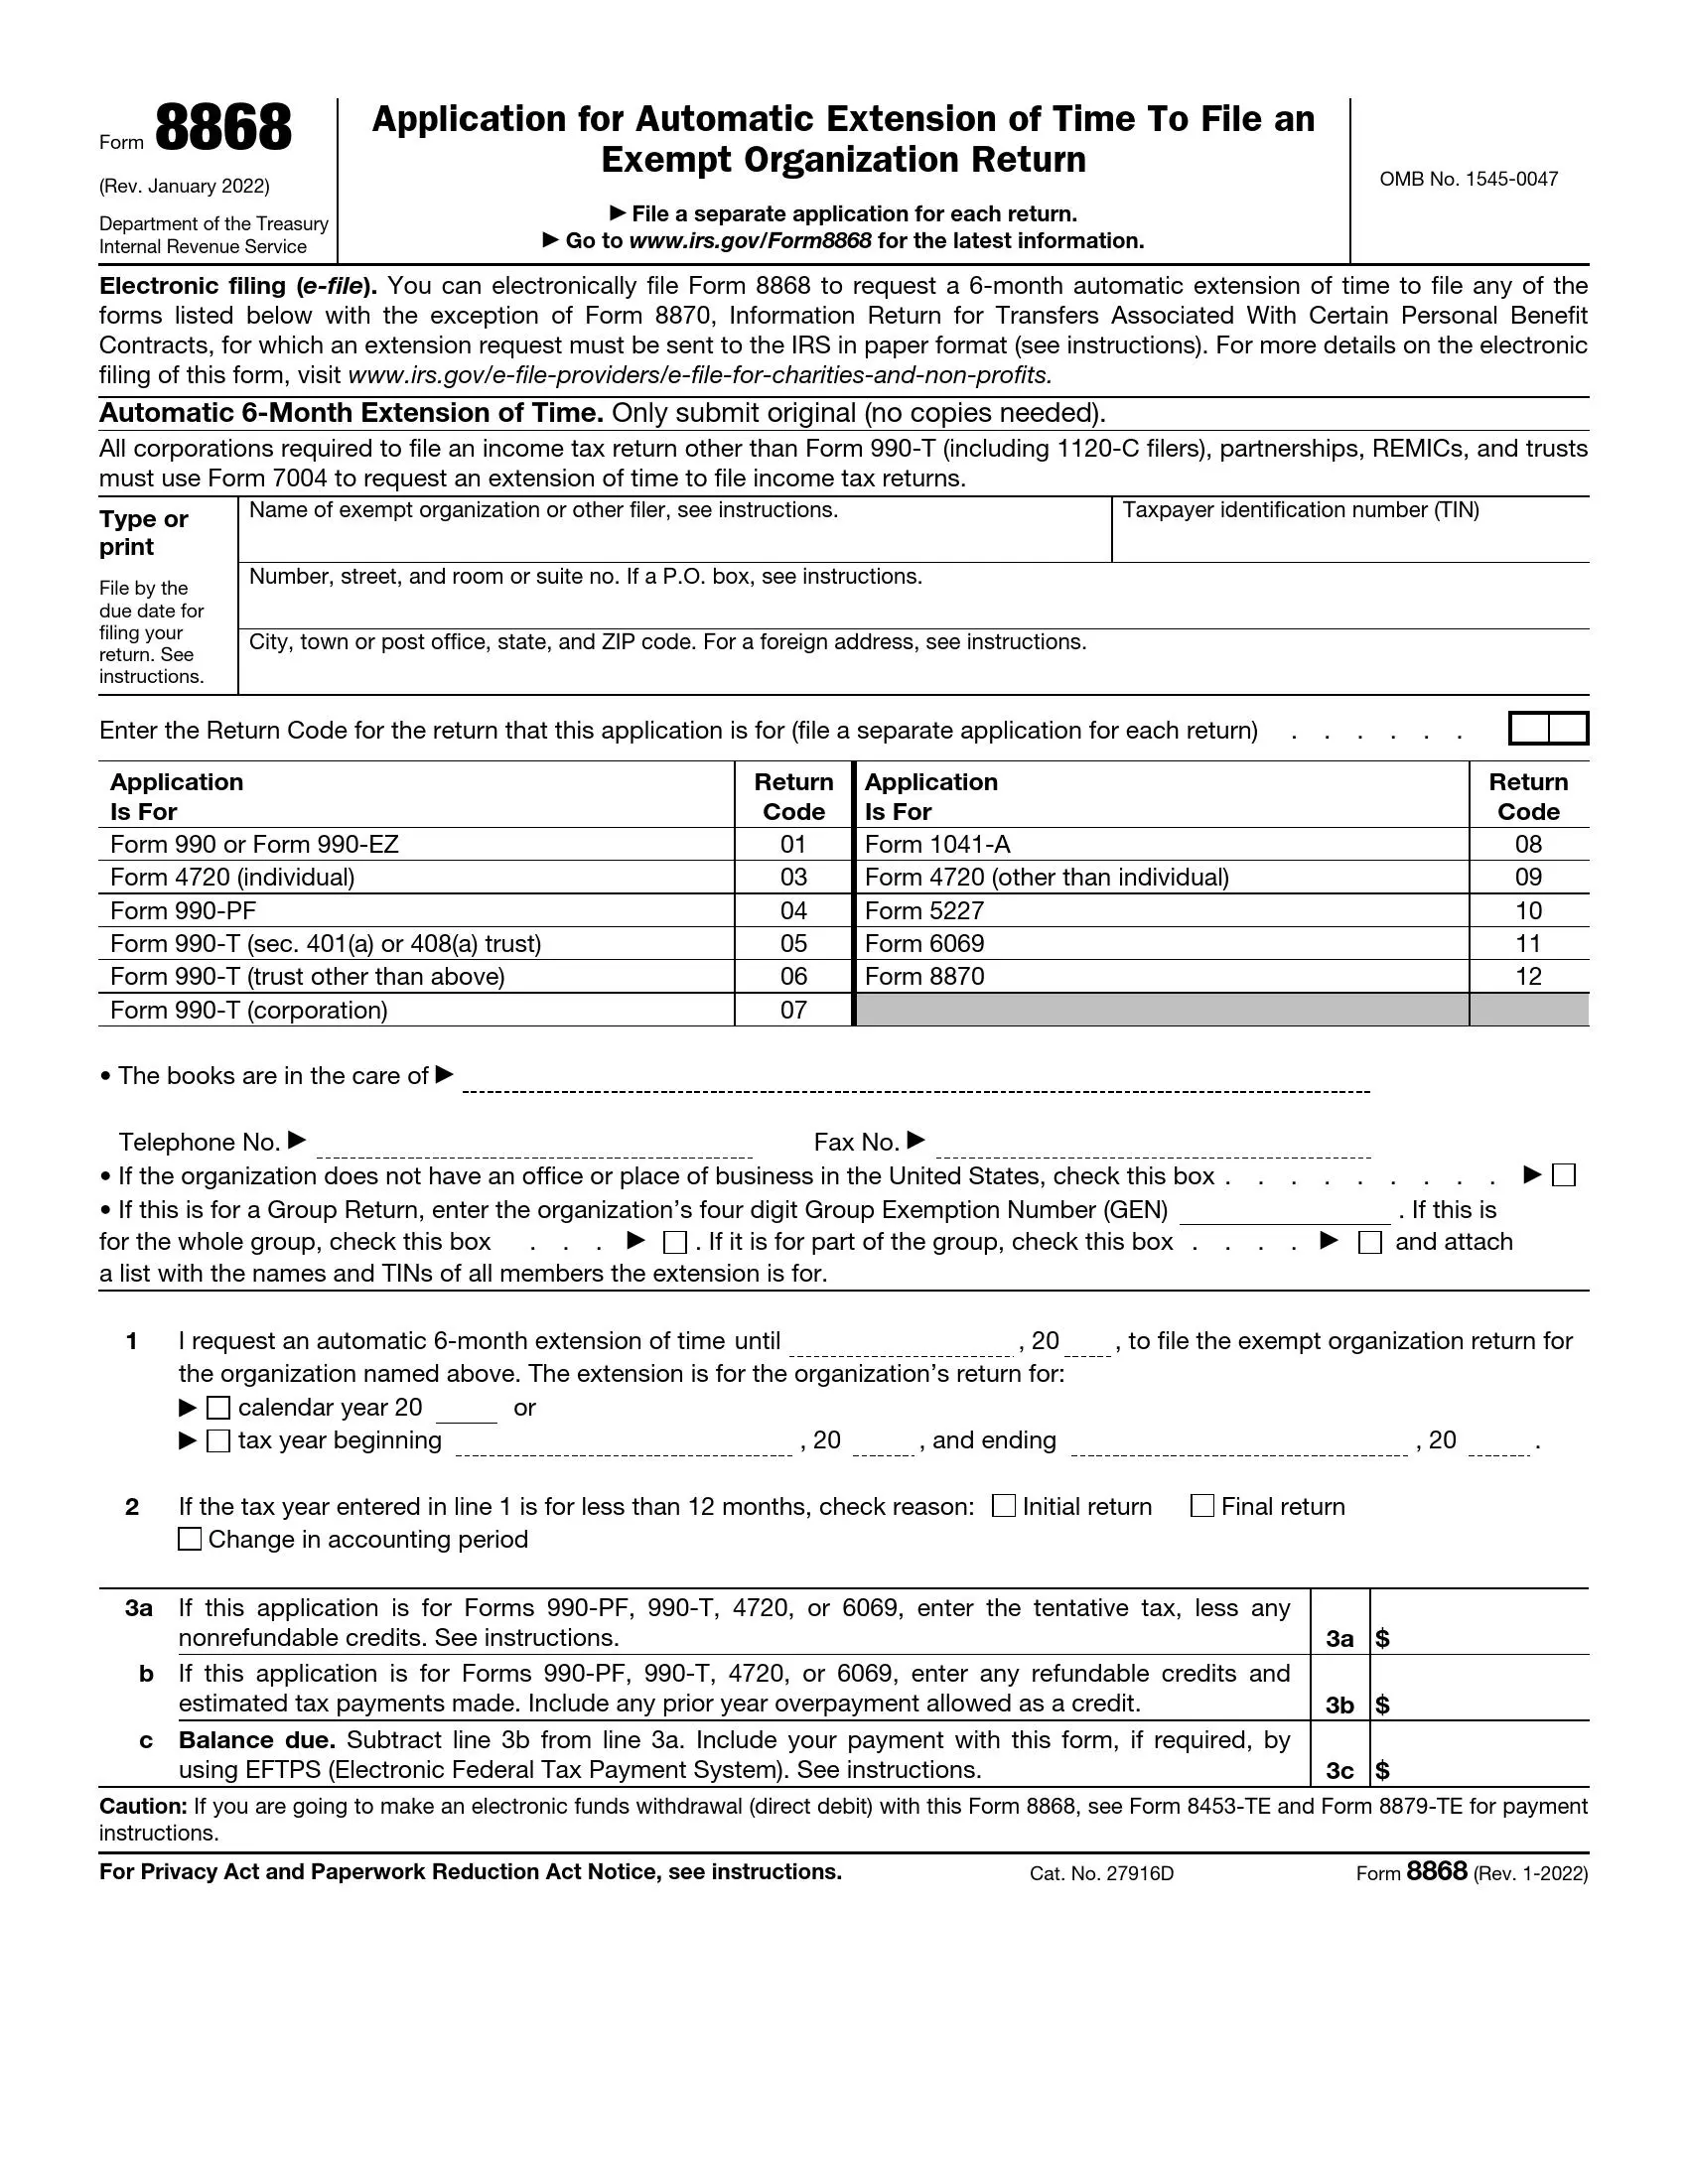 irs form 8868 rev 01 2022 preview